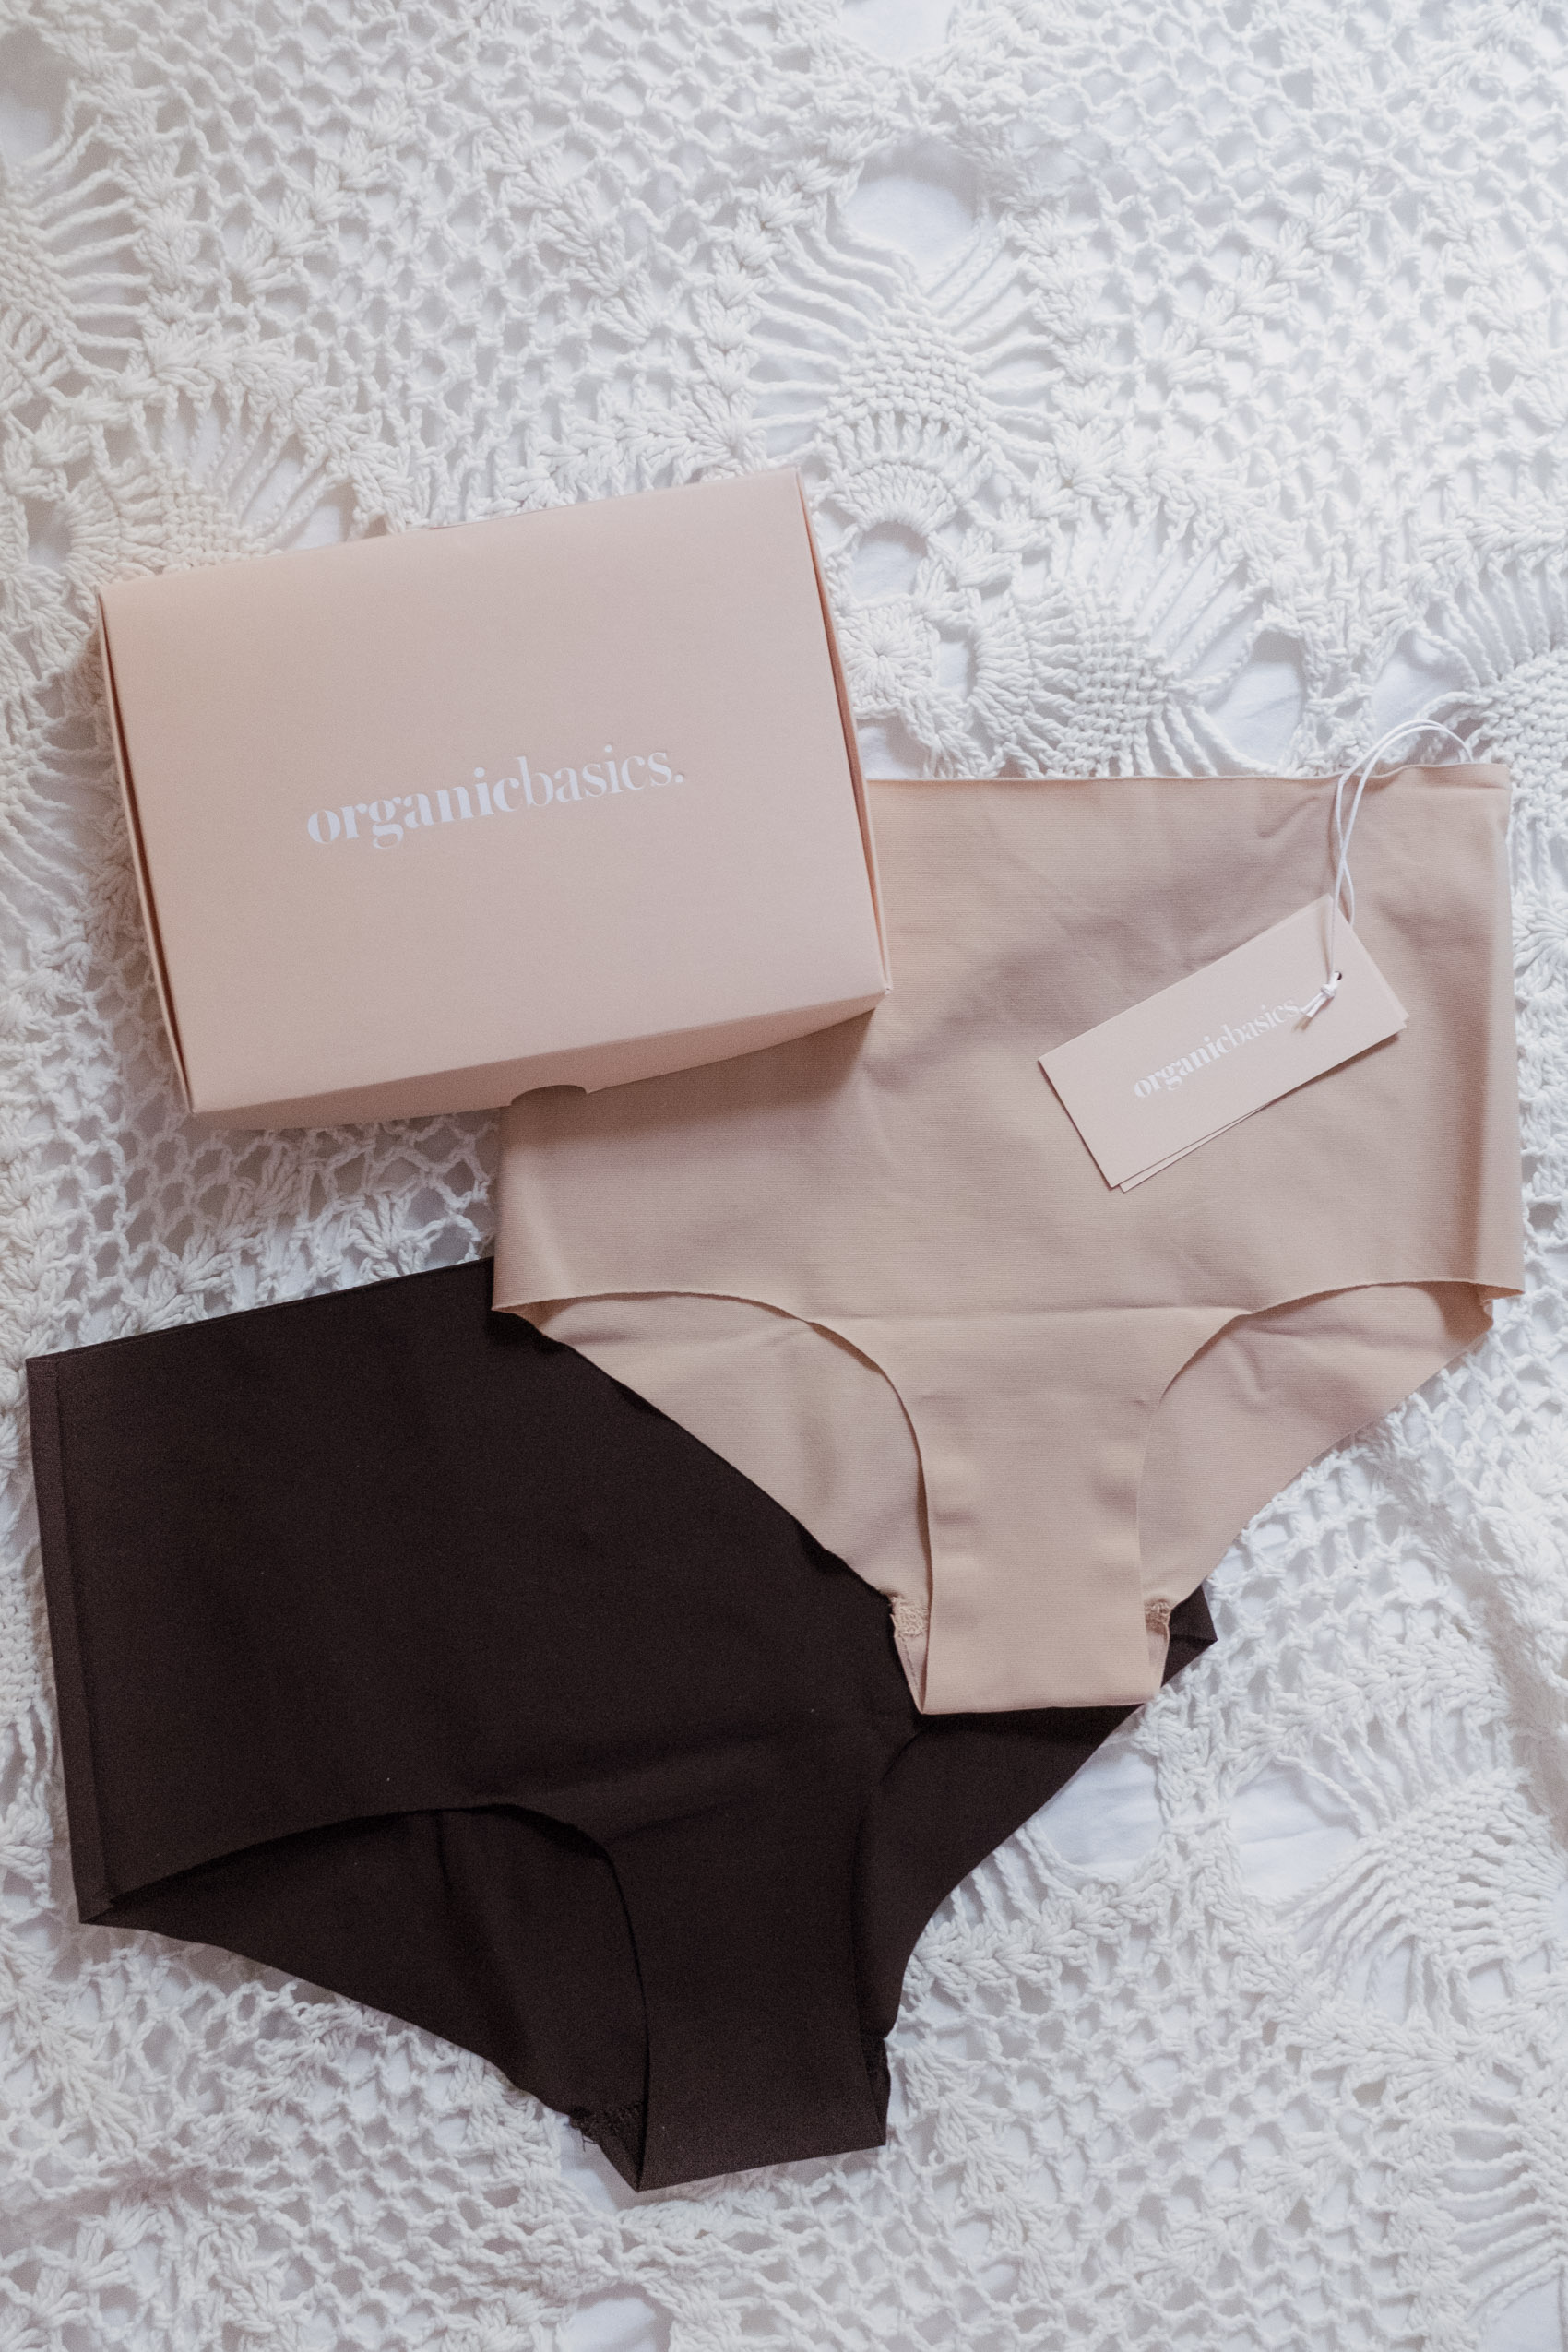 Sustainable and Invisible Underwear - Organic Basics Review